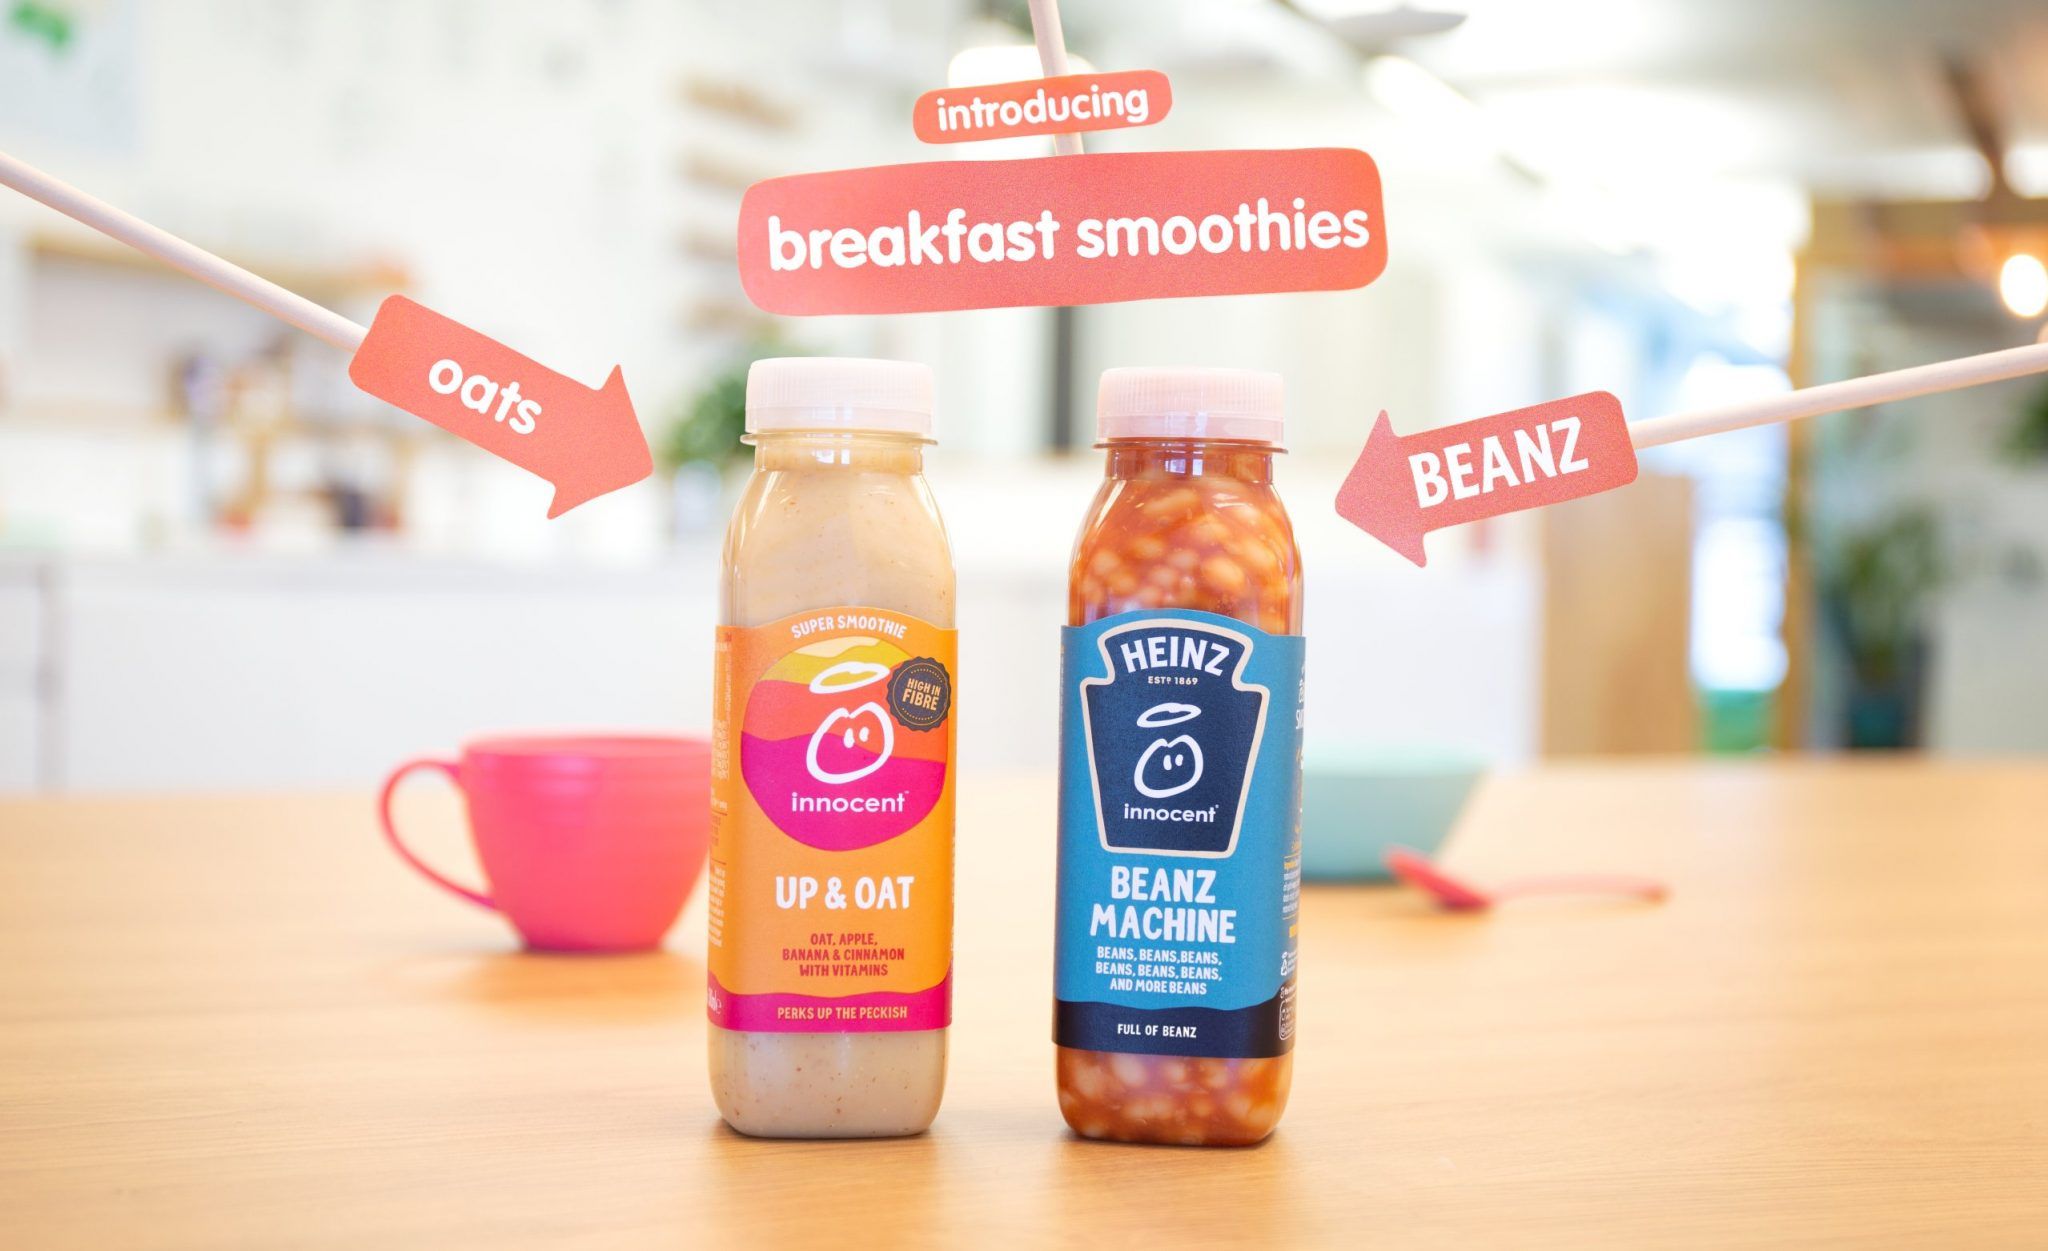 Baked bean smoothie: Heinz and Innocent team up for breakfast drink